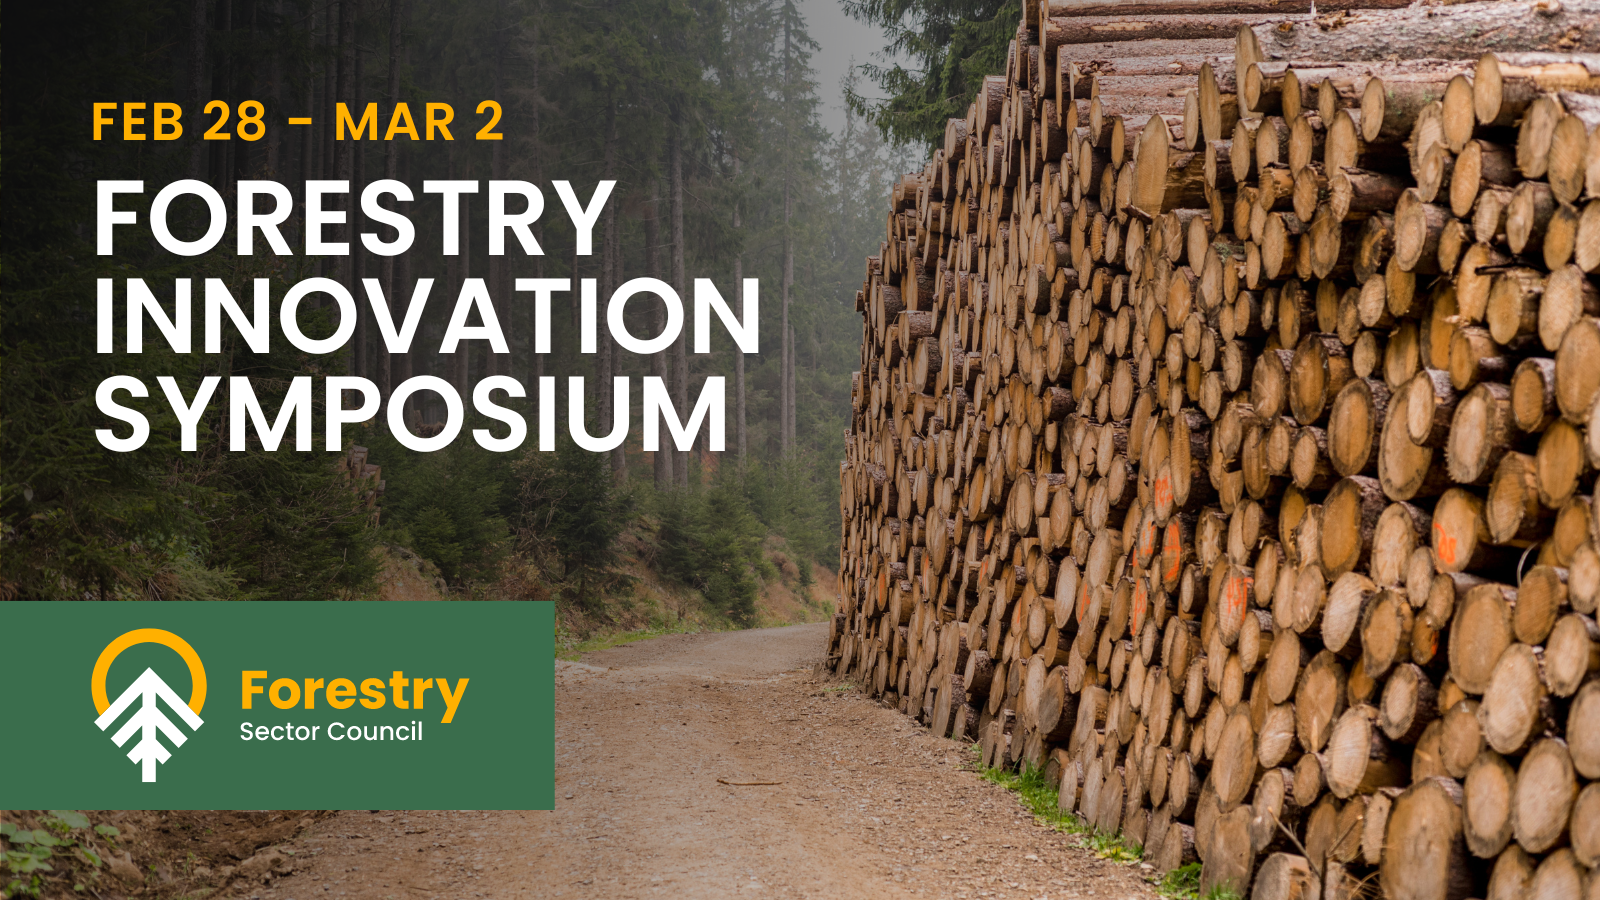 Forestry Innovation Symposium promo graphic with dates February 28 to March 2.